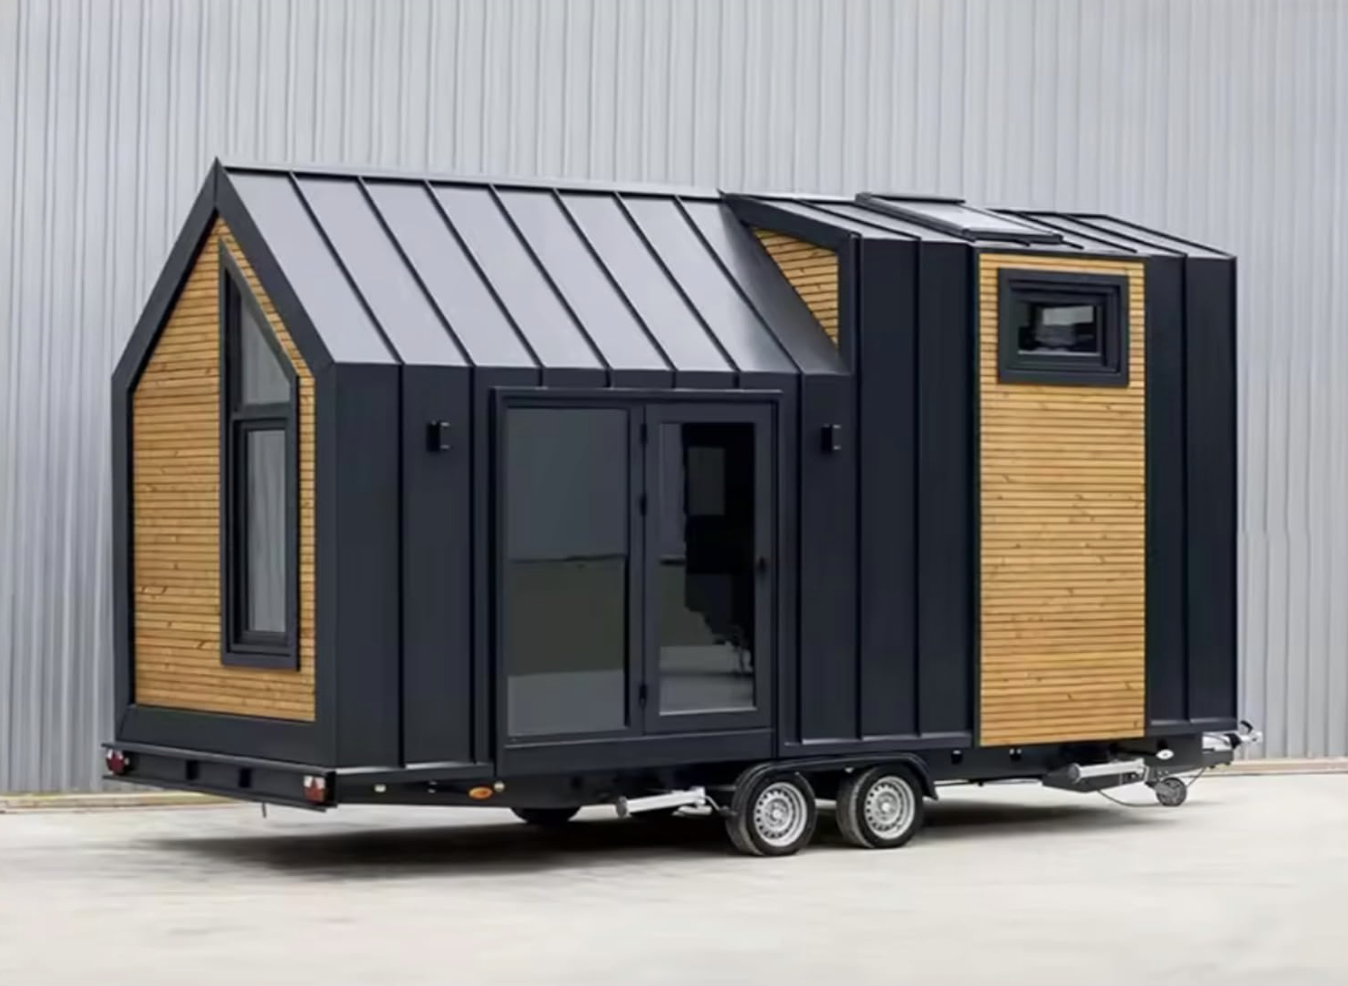 Modern tiny house on wheels with sliding door and wood paneling, featured in a Nifty article